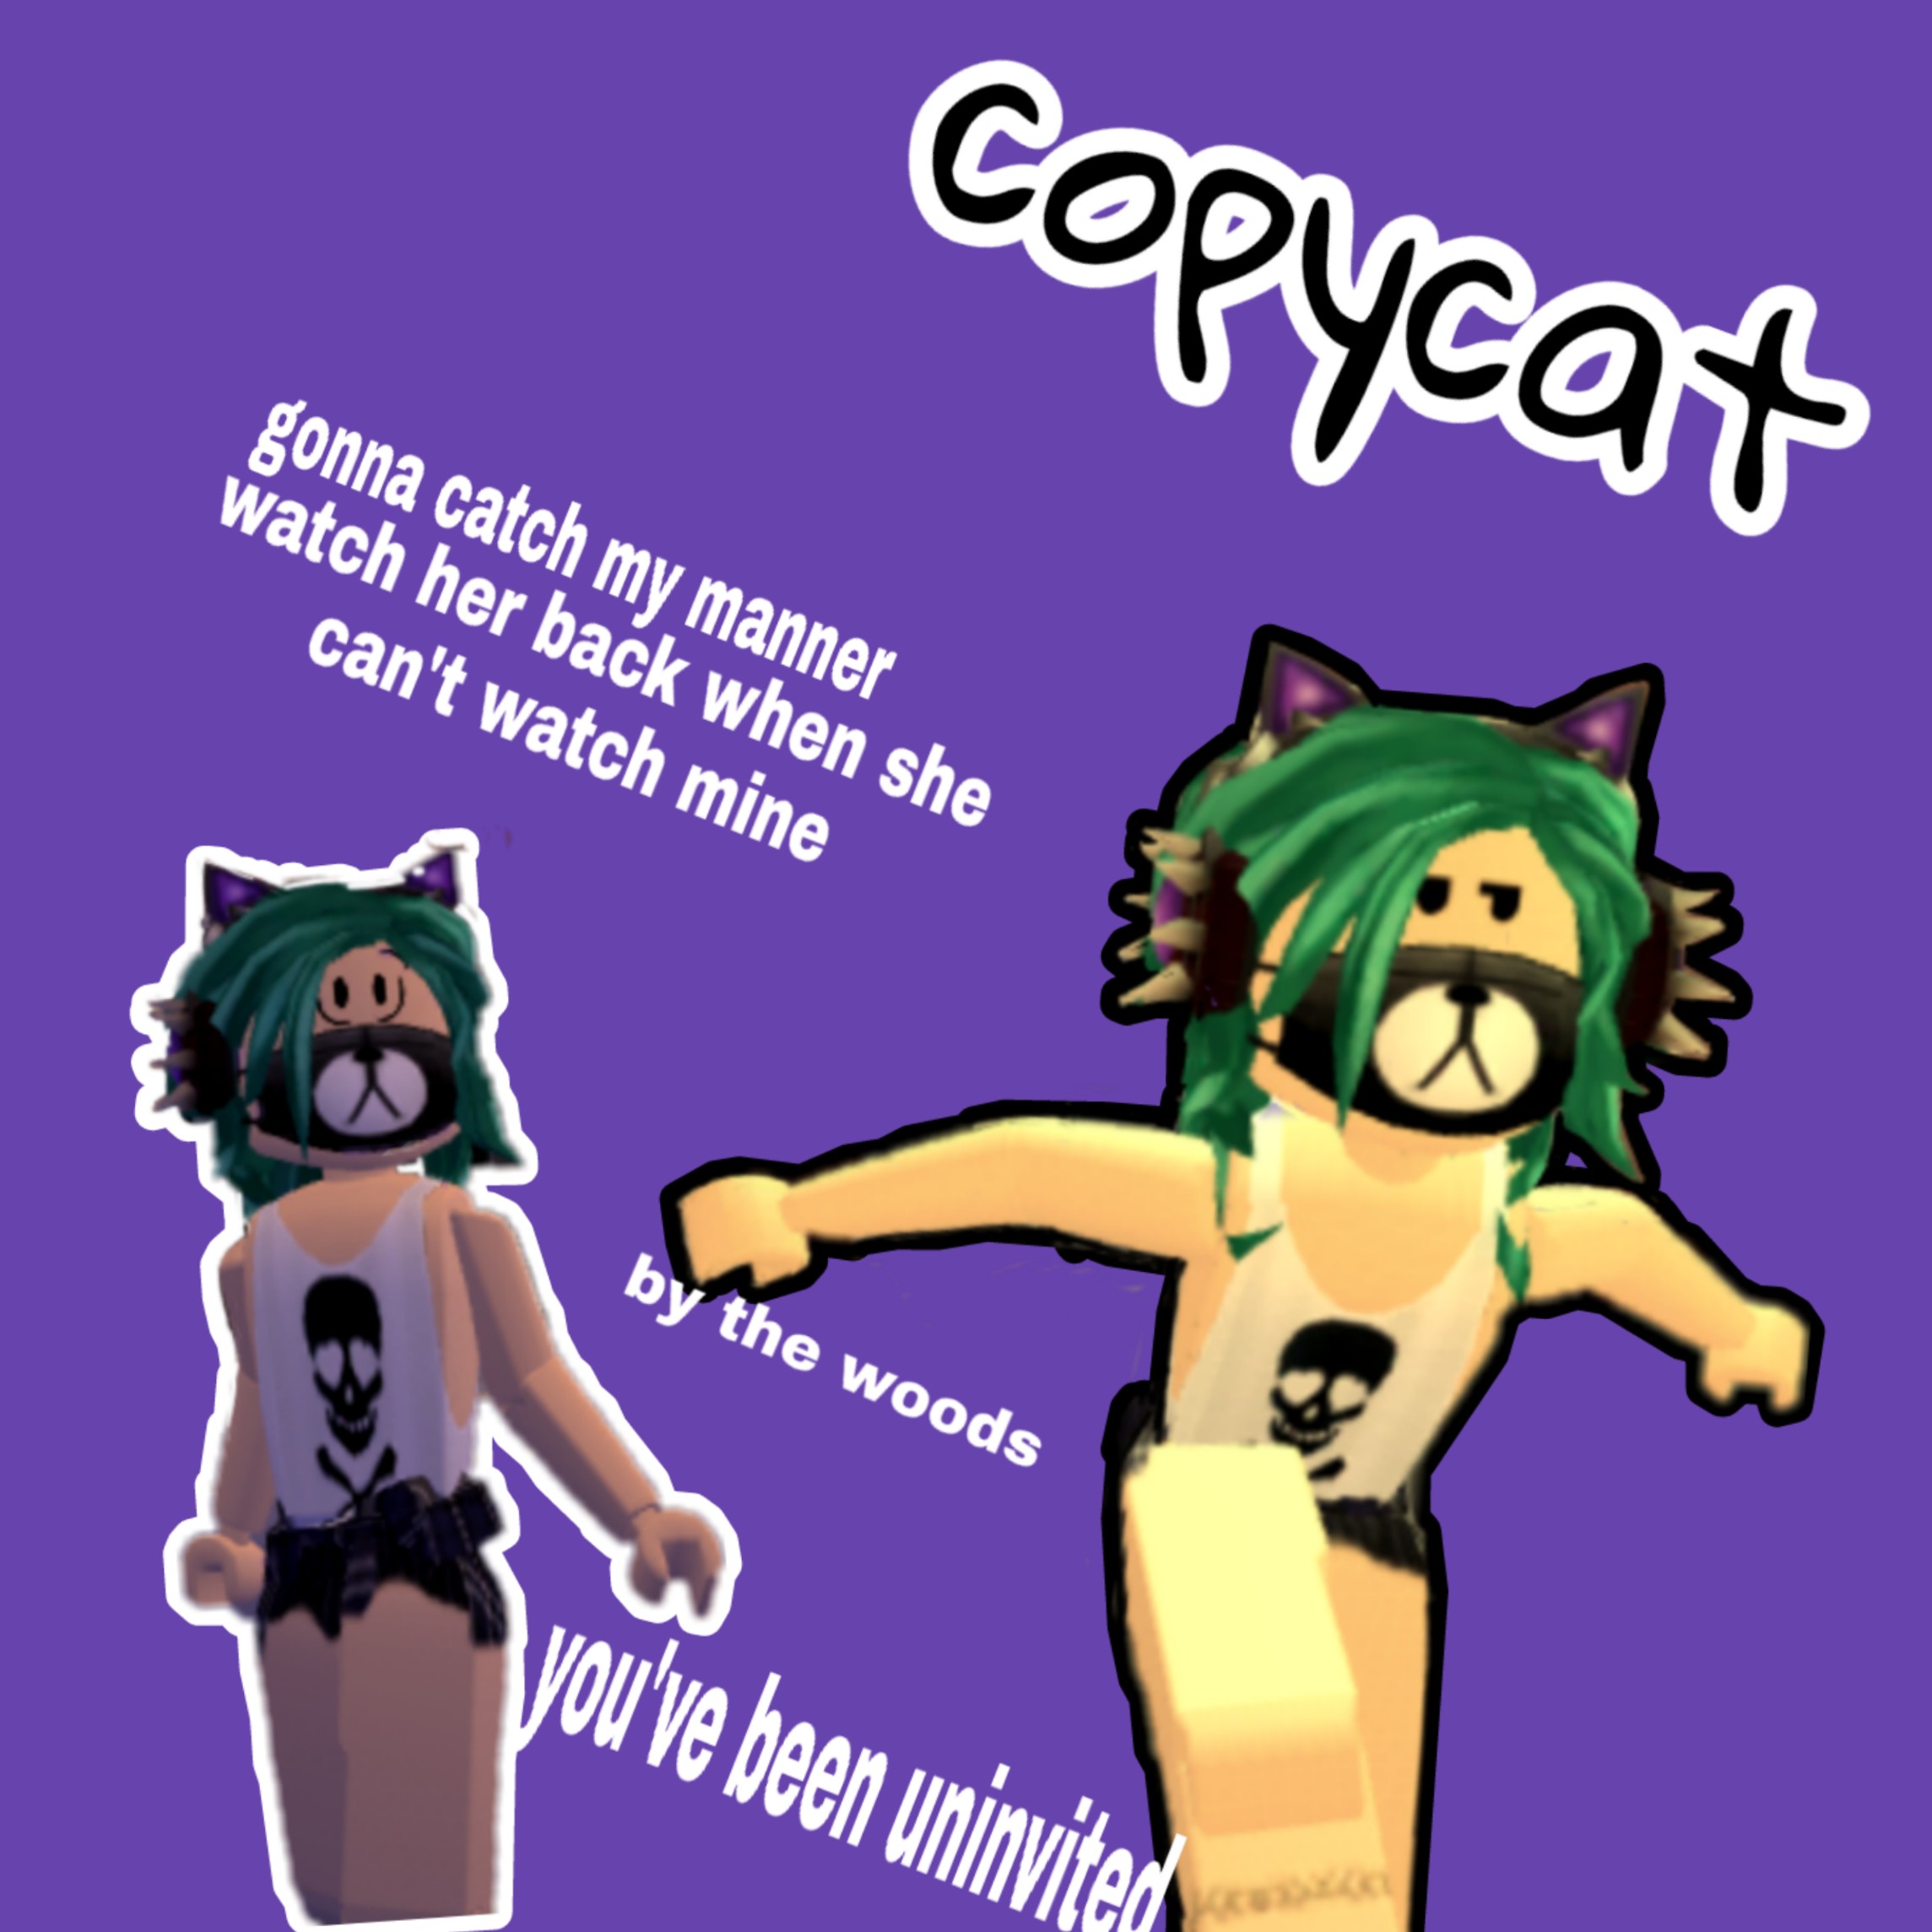 Roblox Copycat Song Image By Lydia - roblox mine song